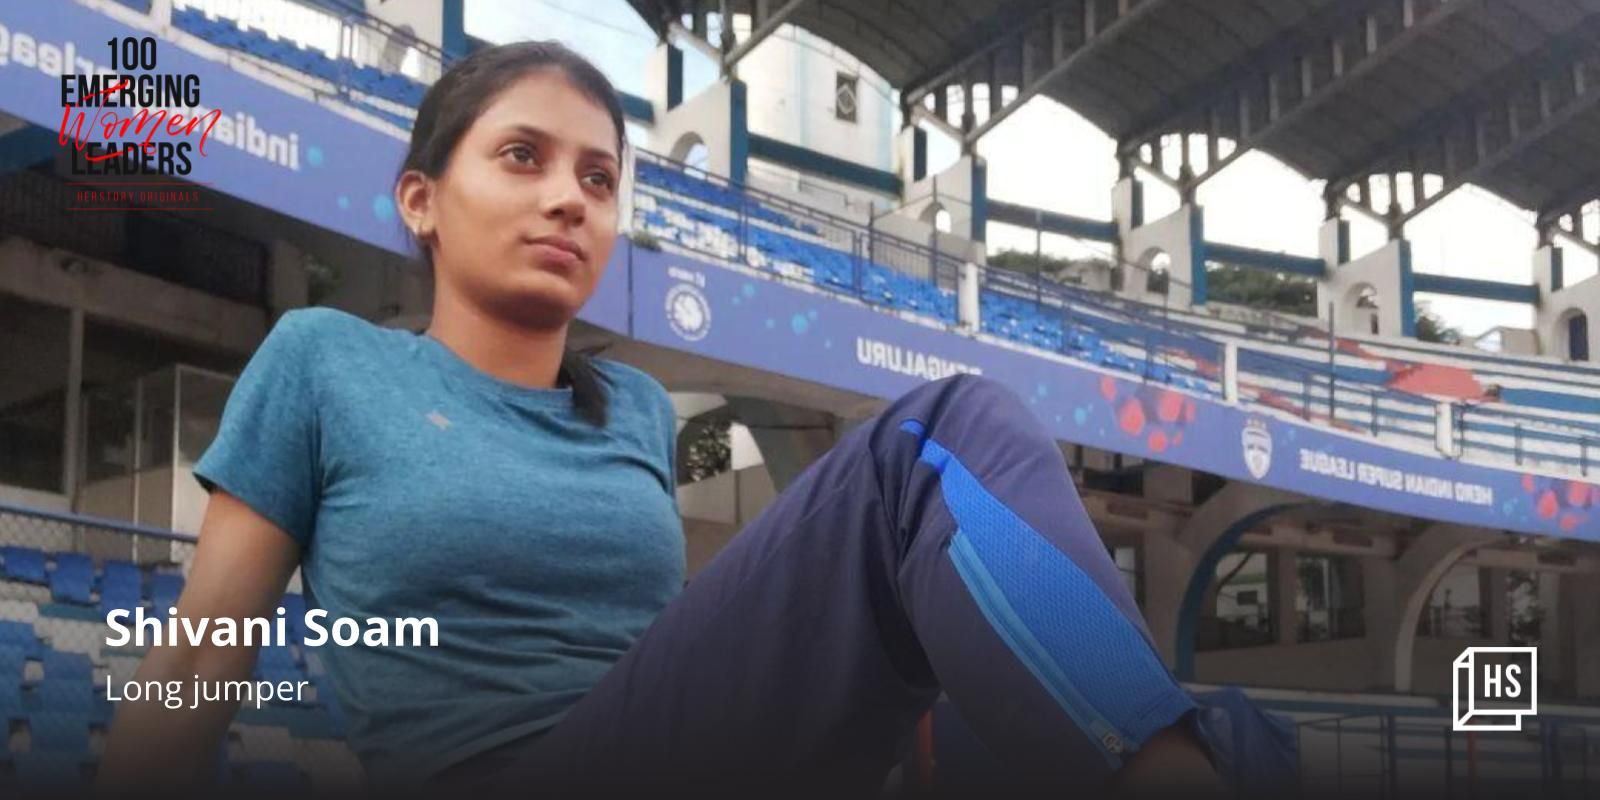 [100 Emerging Women Leaders] Eyeing the Olympics, this long jumper is leaping over societal pressures